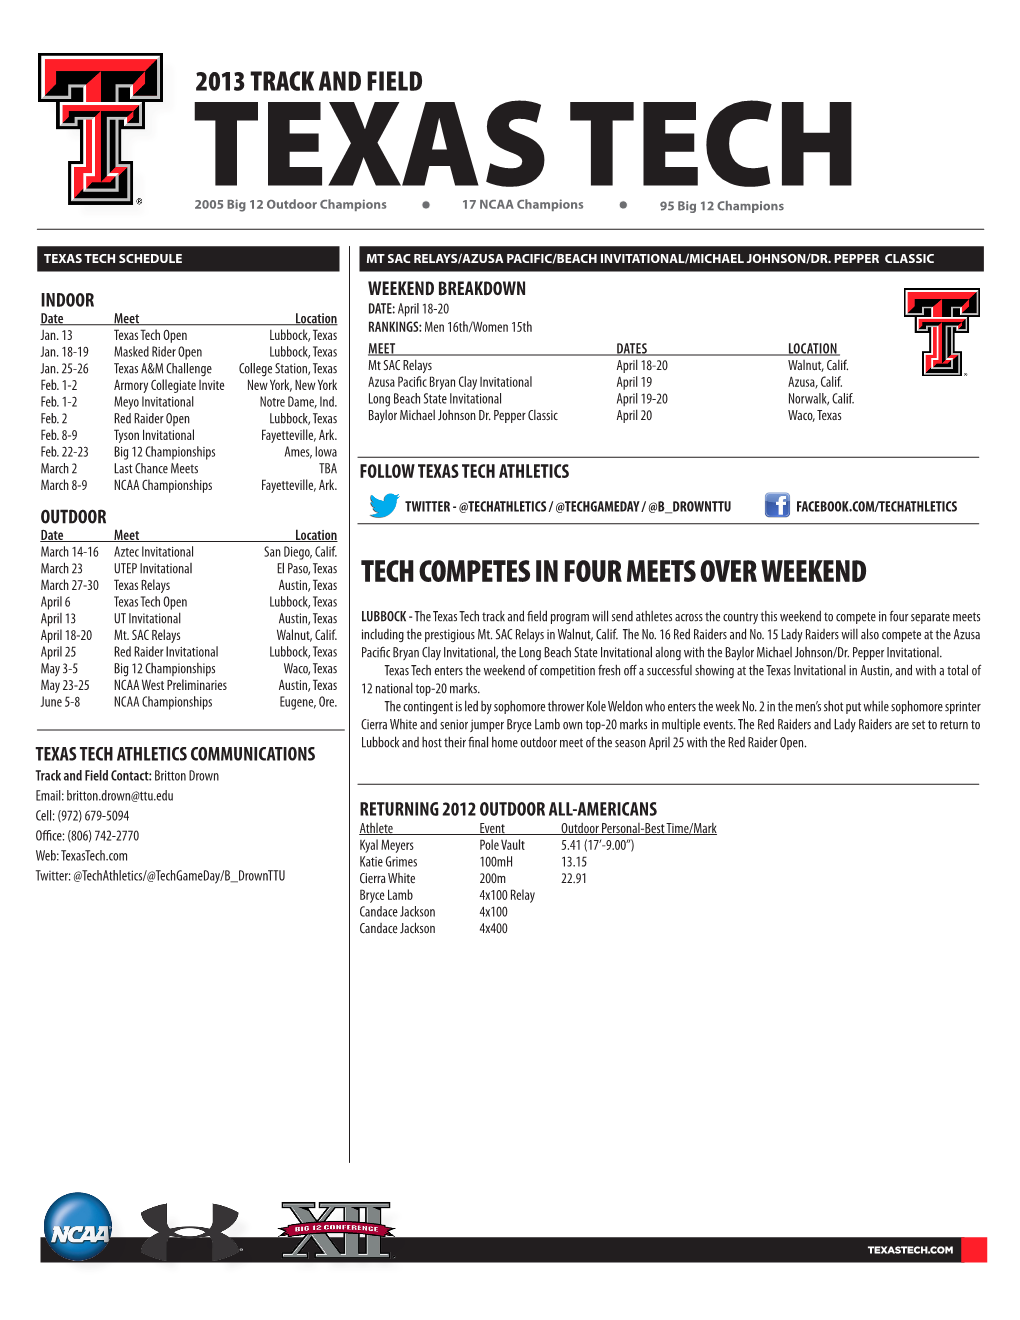 Tech Competes in Four Meets Over Weekend